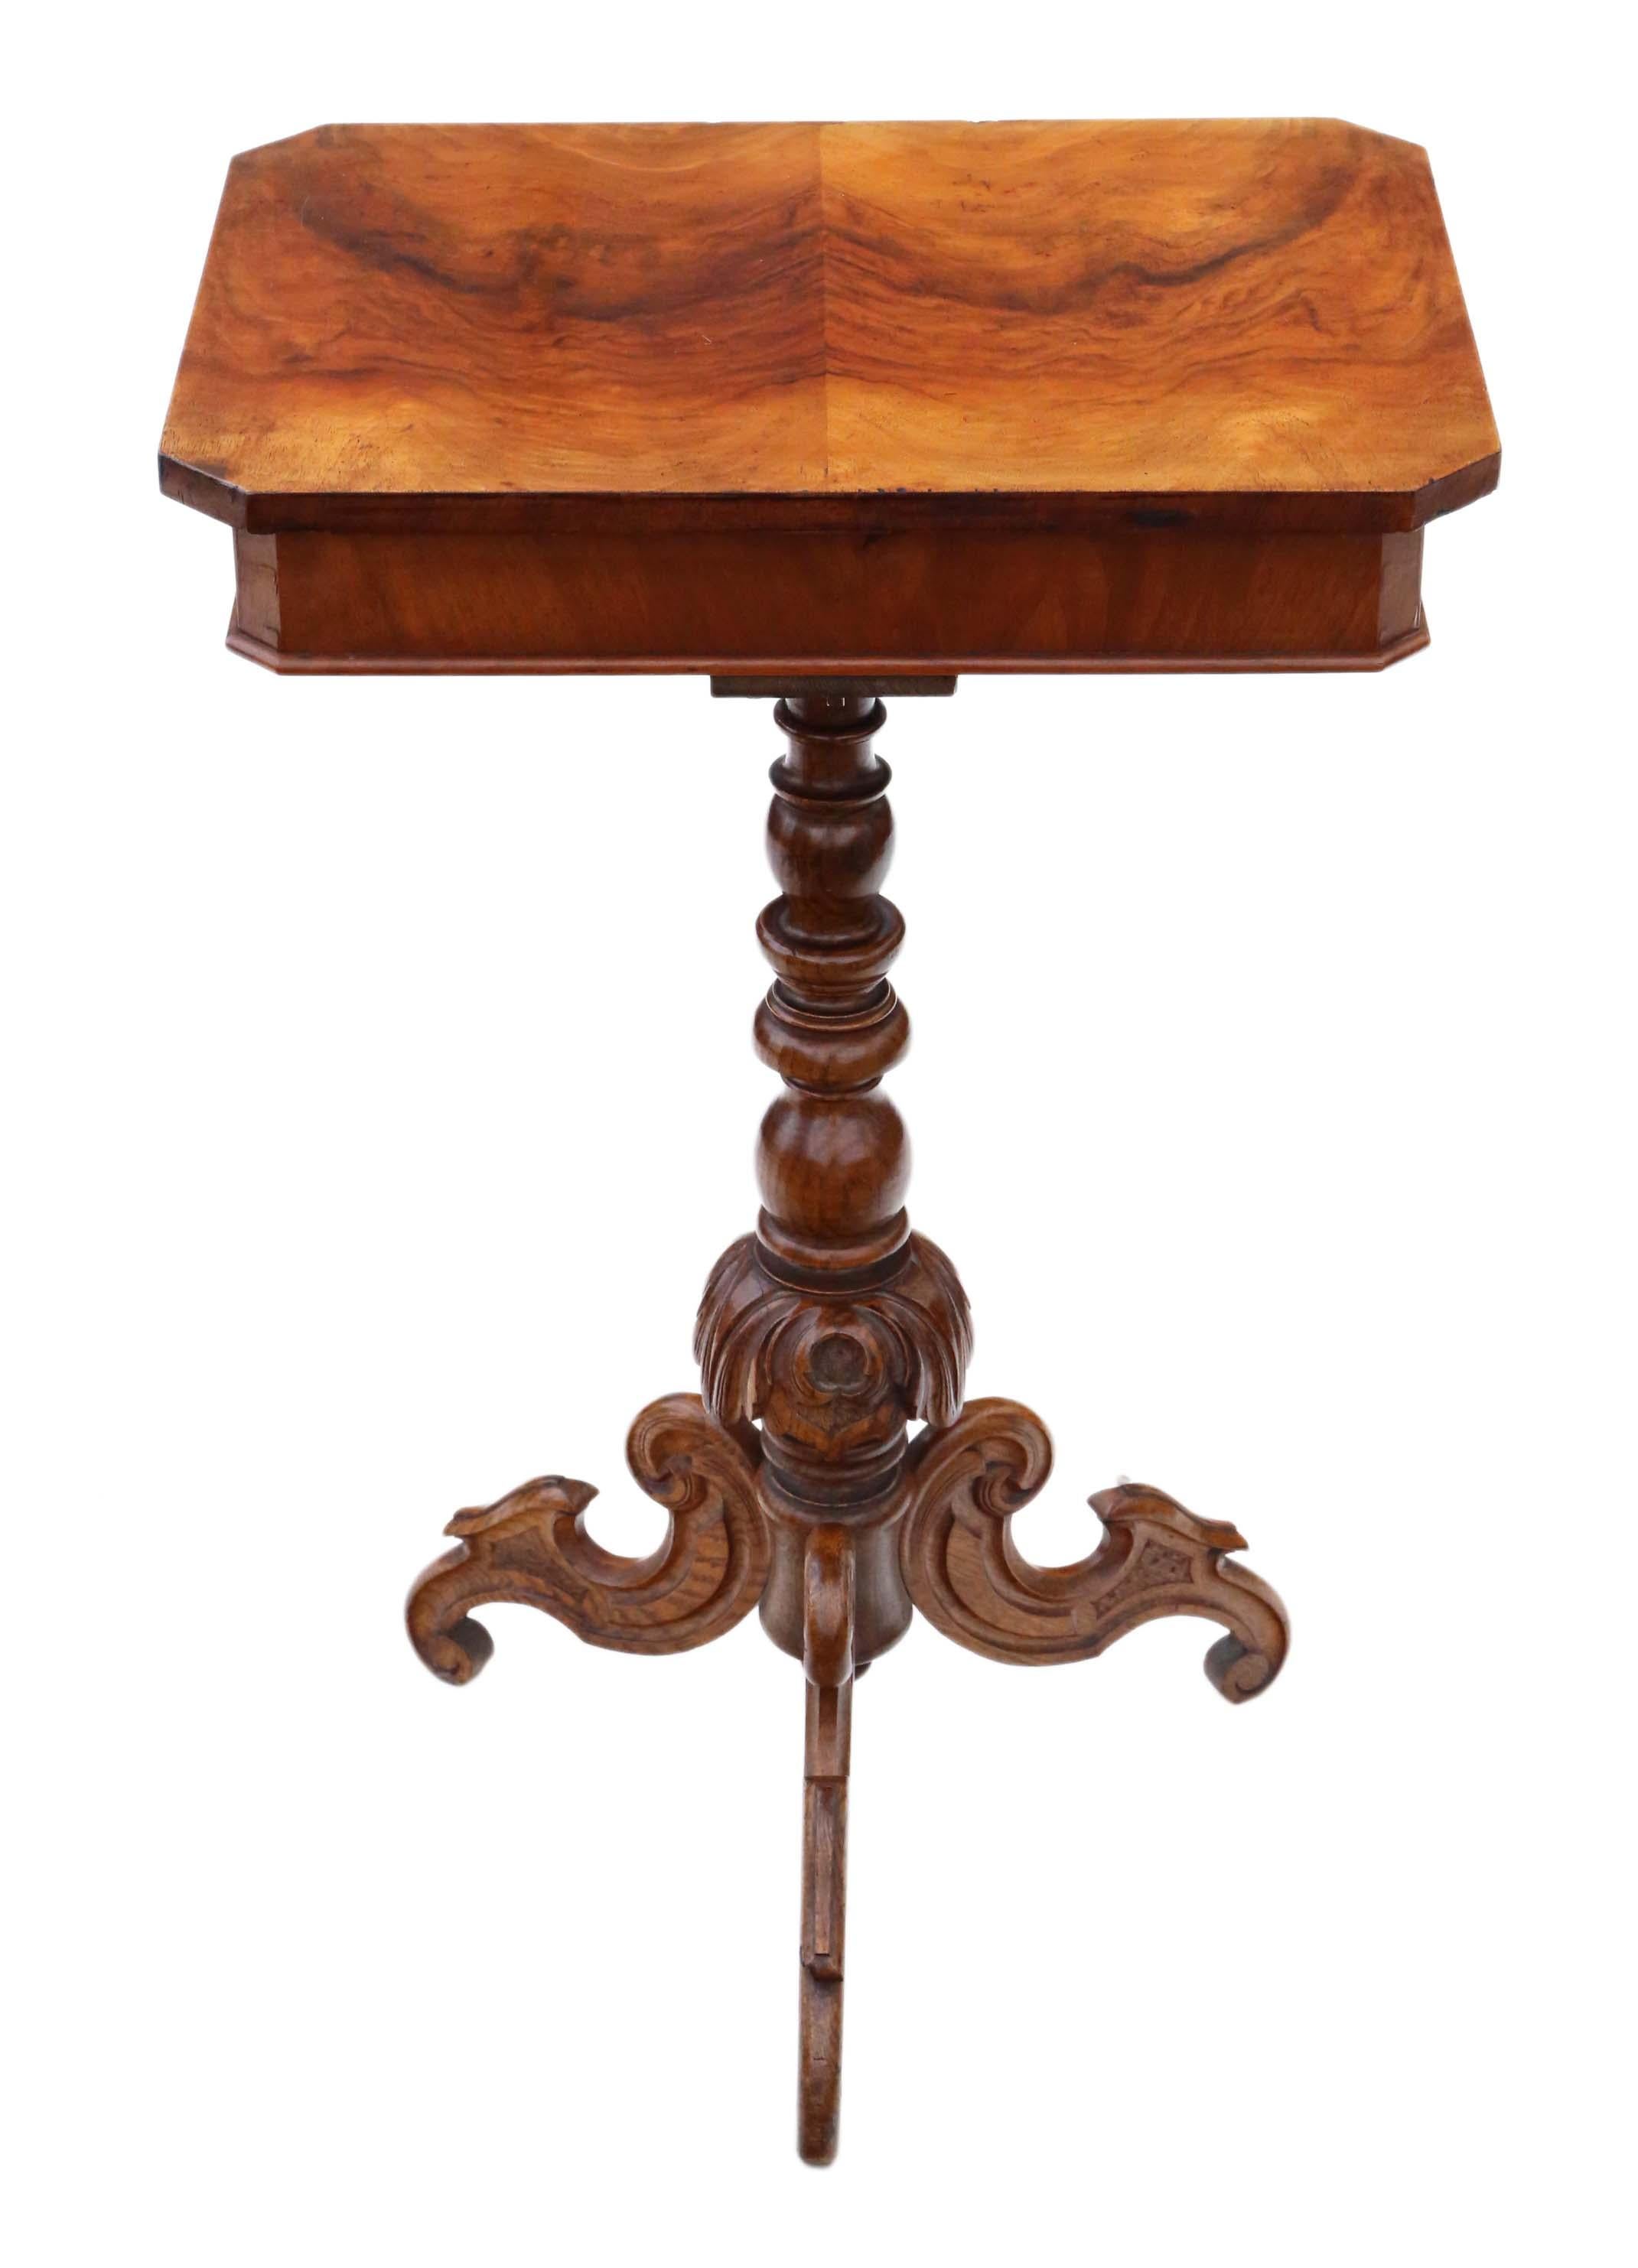 Antique Victorian circa 1860 Burr Walnut Work Side Sewing Table Box For Sale 2